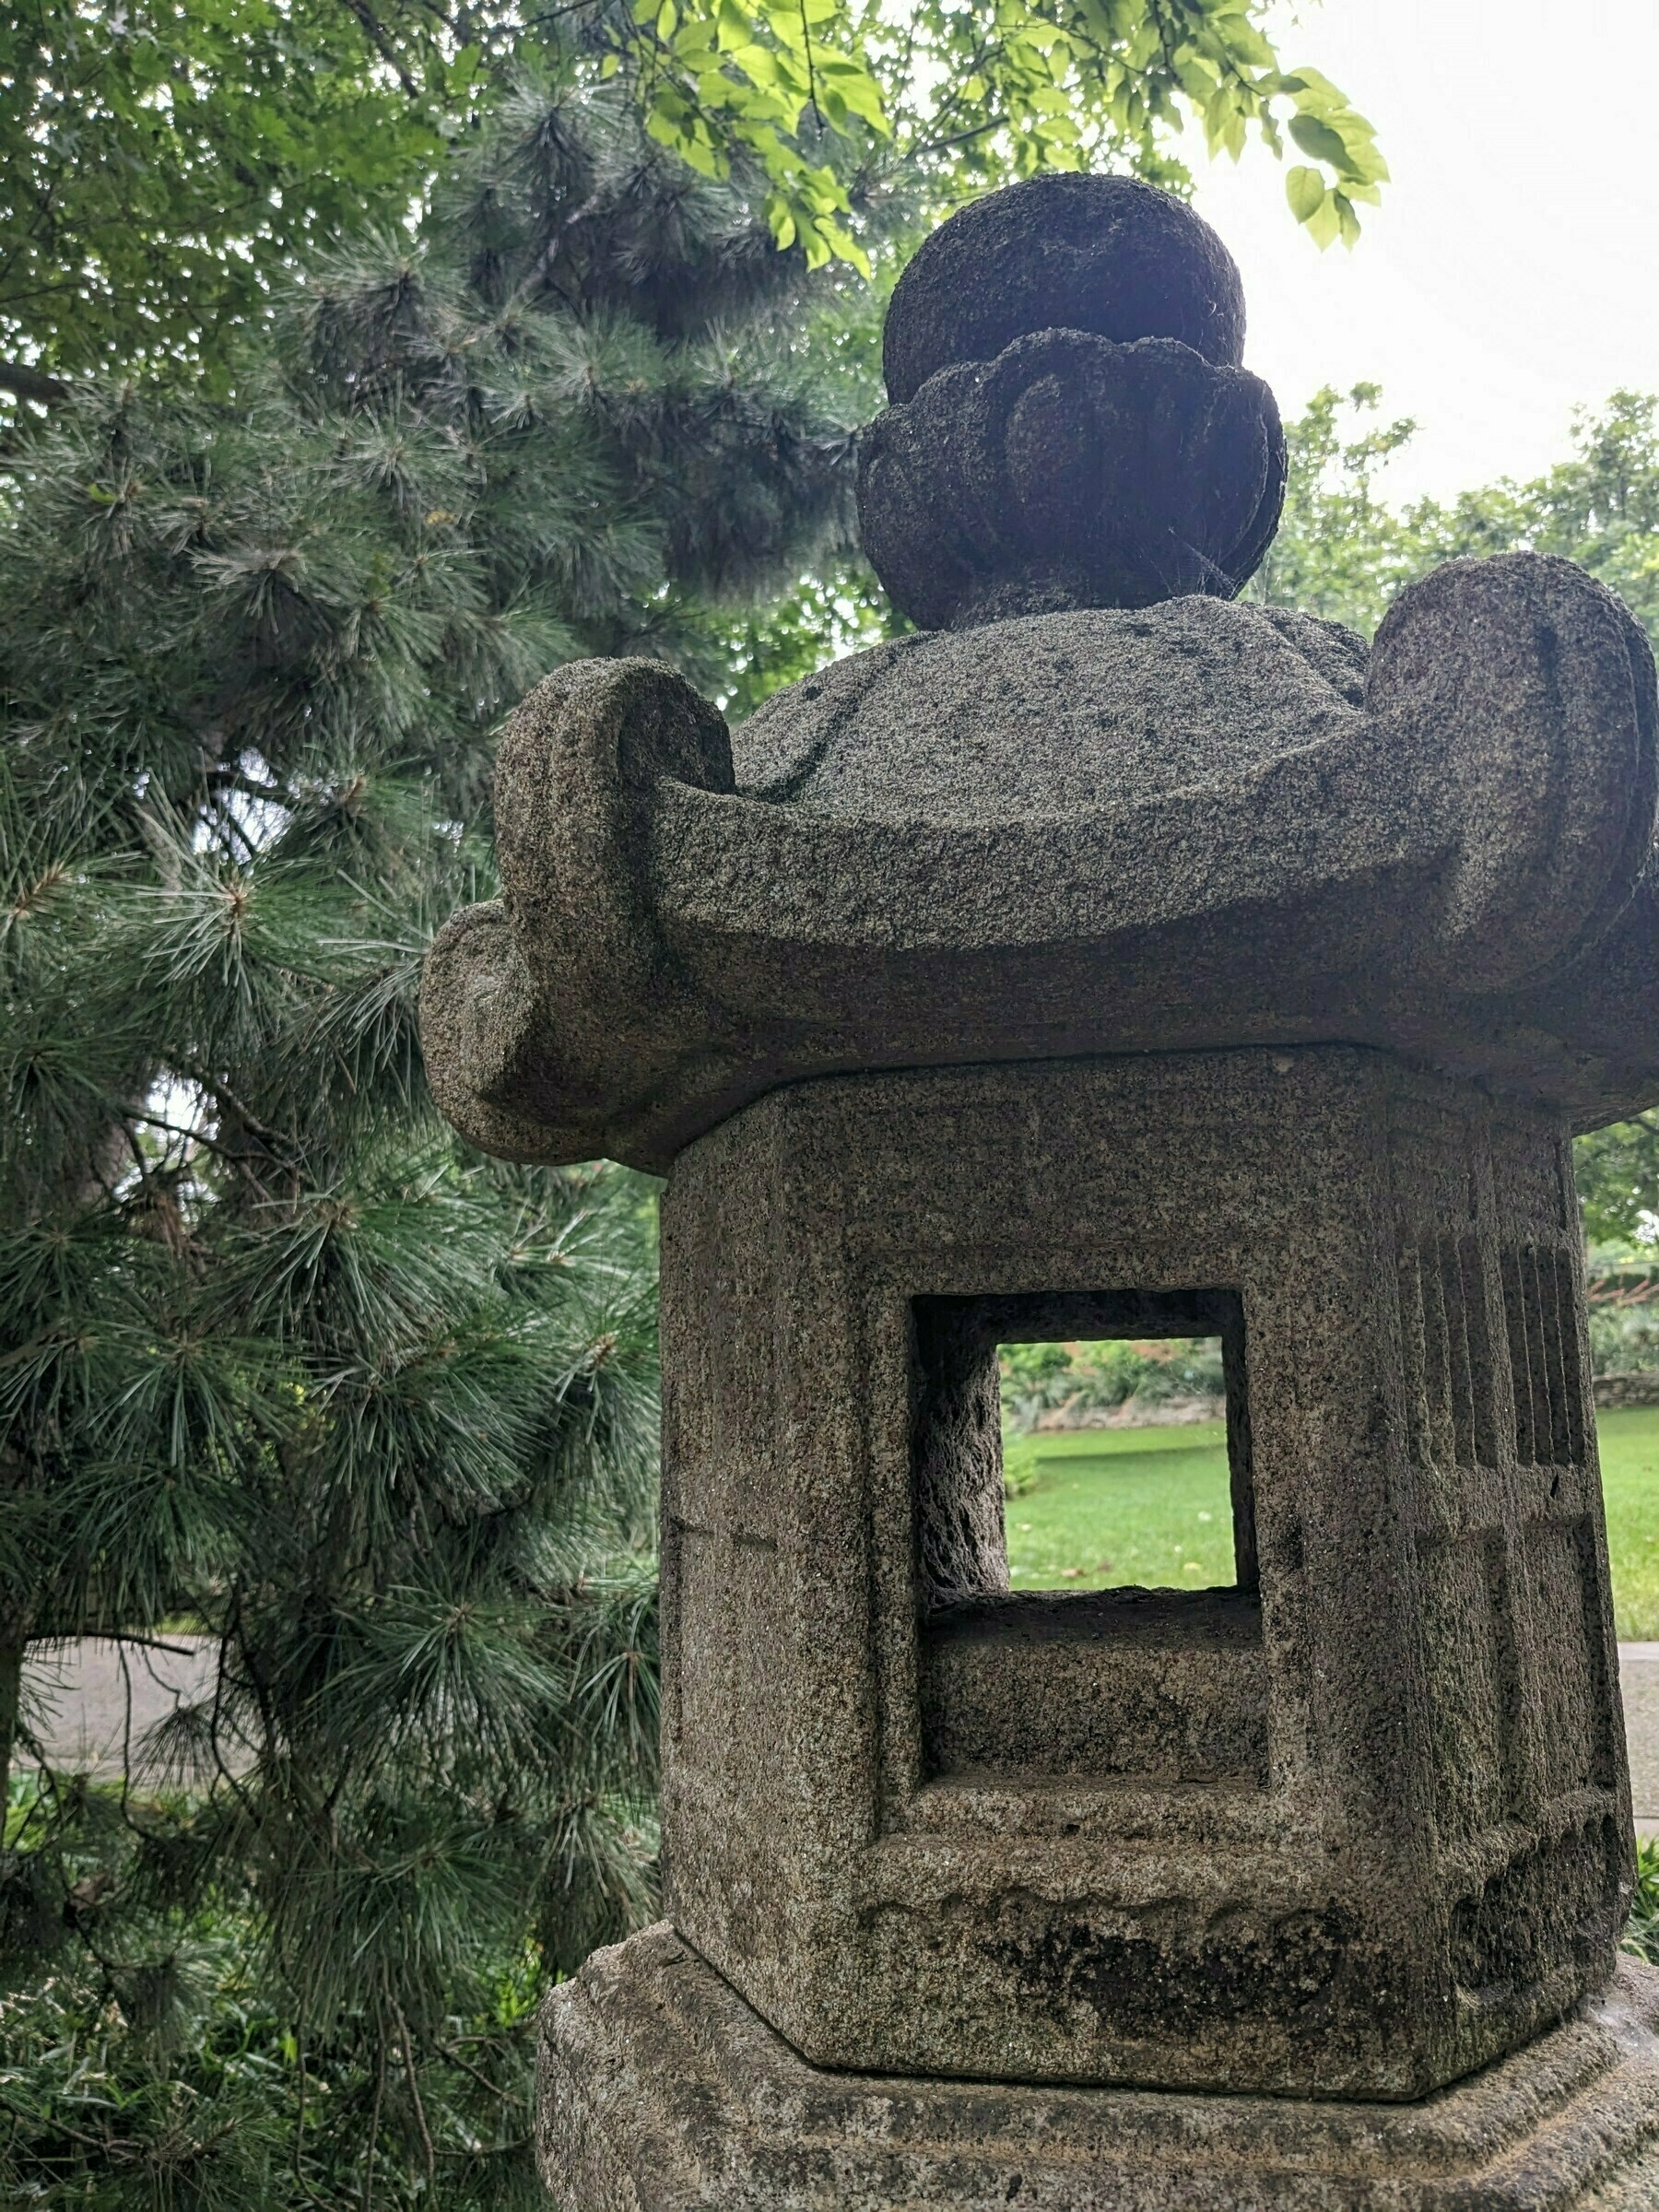 Looking through a Japanese stone lantern in a park